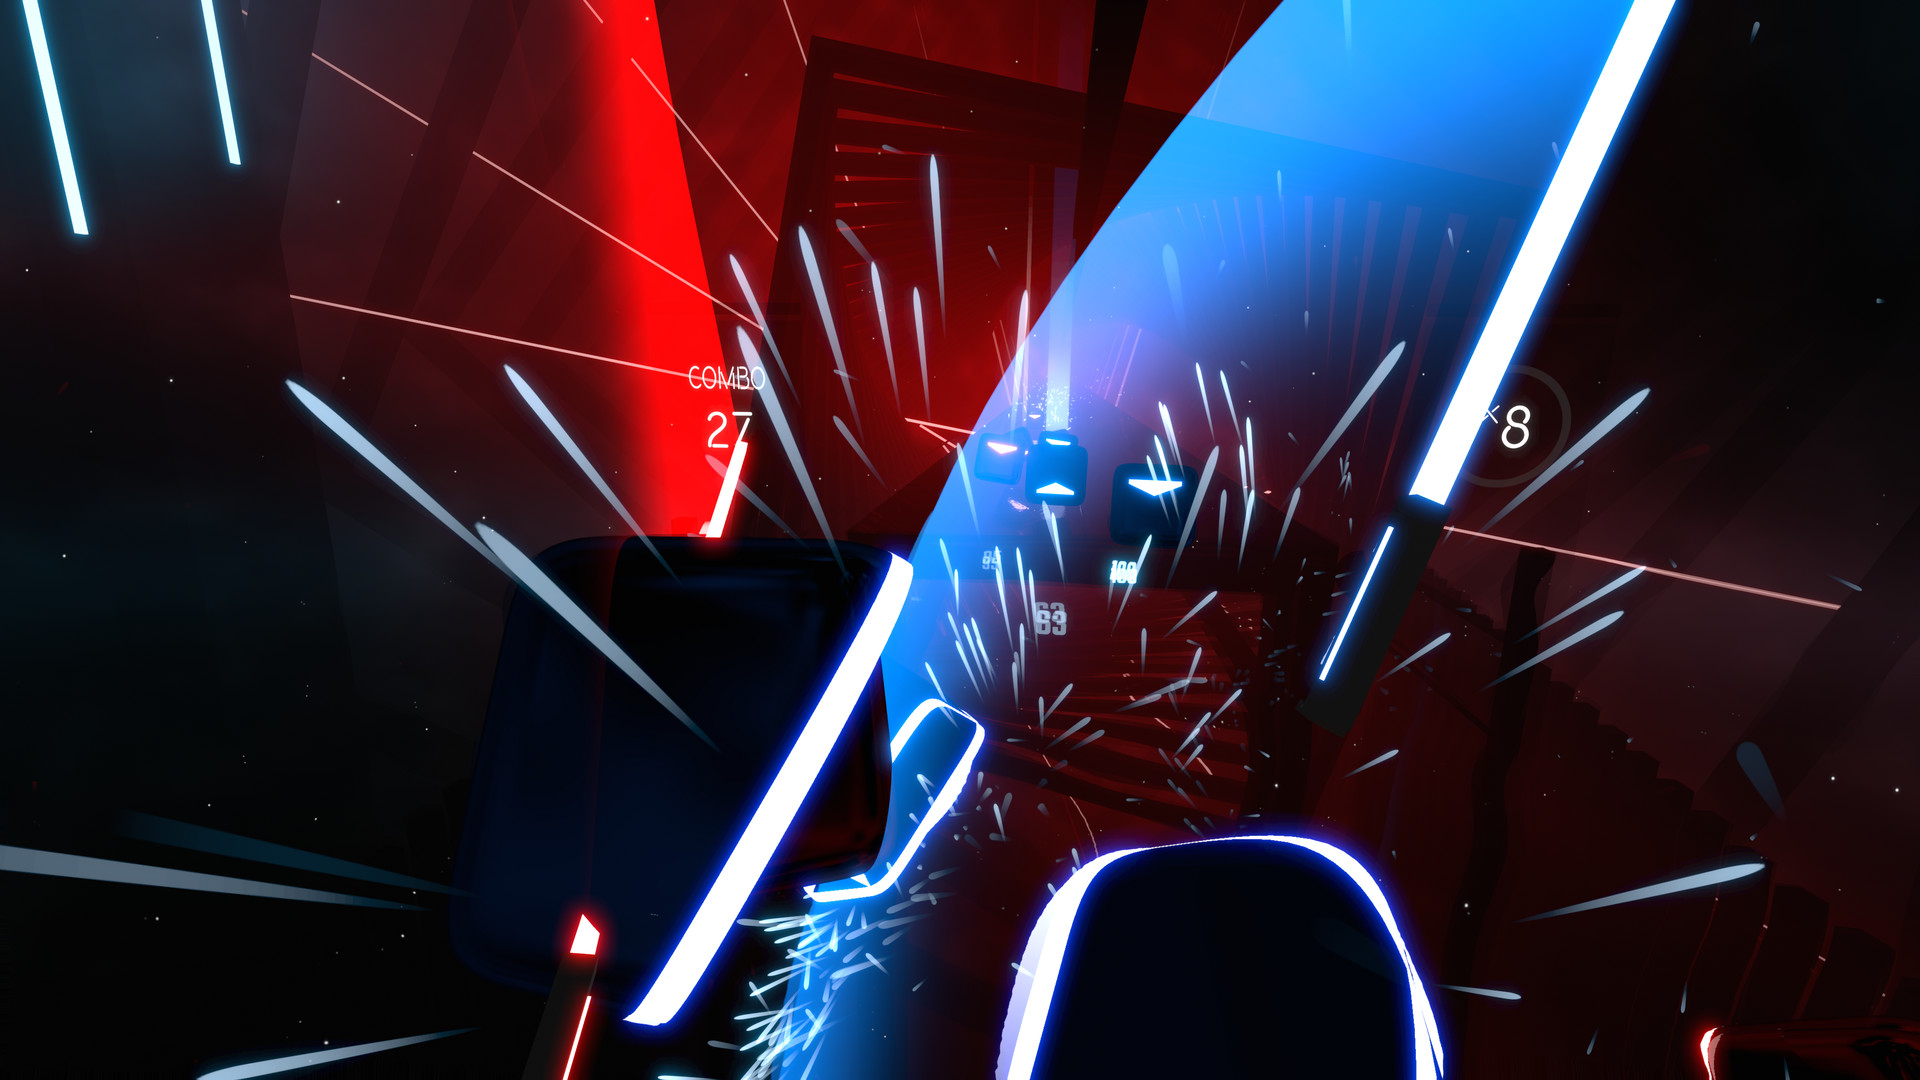 Can You Play Beat Saber Without Vr Headset Man Loses 138 Pounds Following Beat Saber Workout Routine Vrscout